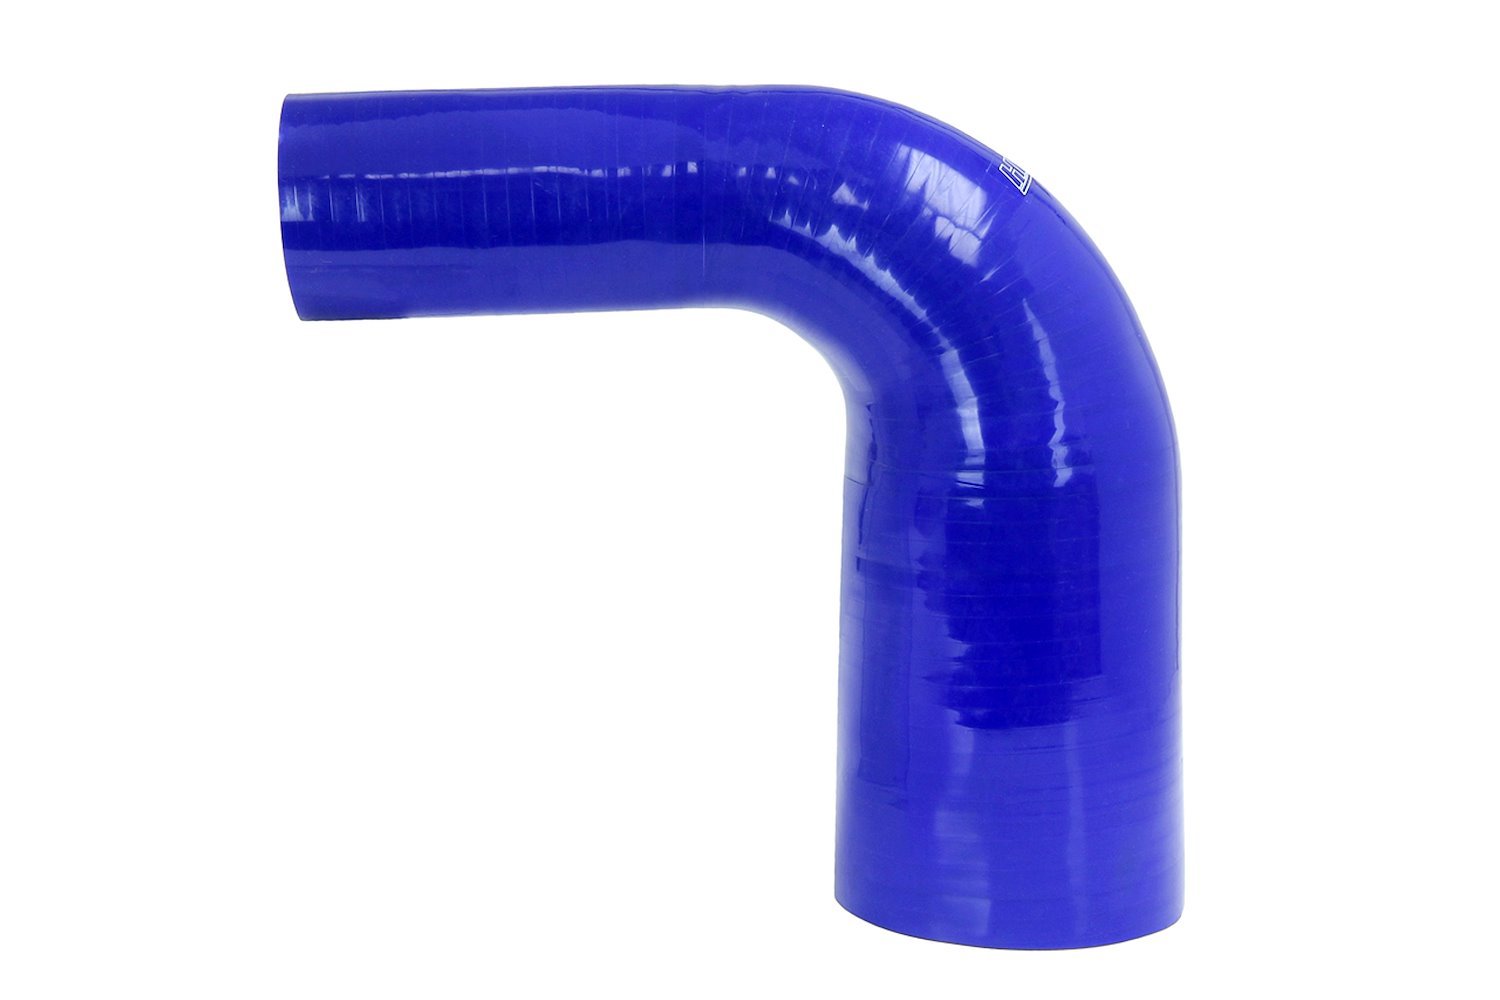 HTSER90-238-256-BLUE Silicone 90-Degree Elbow Hose, High-Temp Reinforced, 2-3/8 in. - 2-9/16 in. ID, Blue